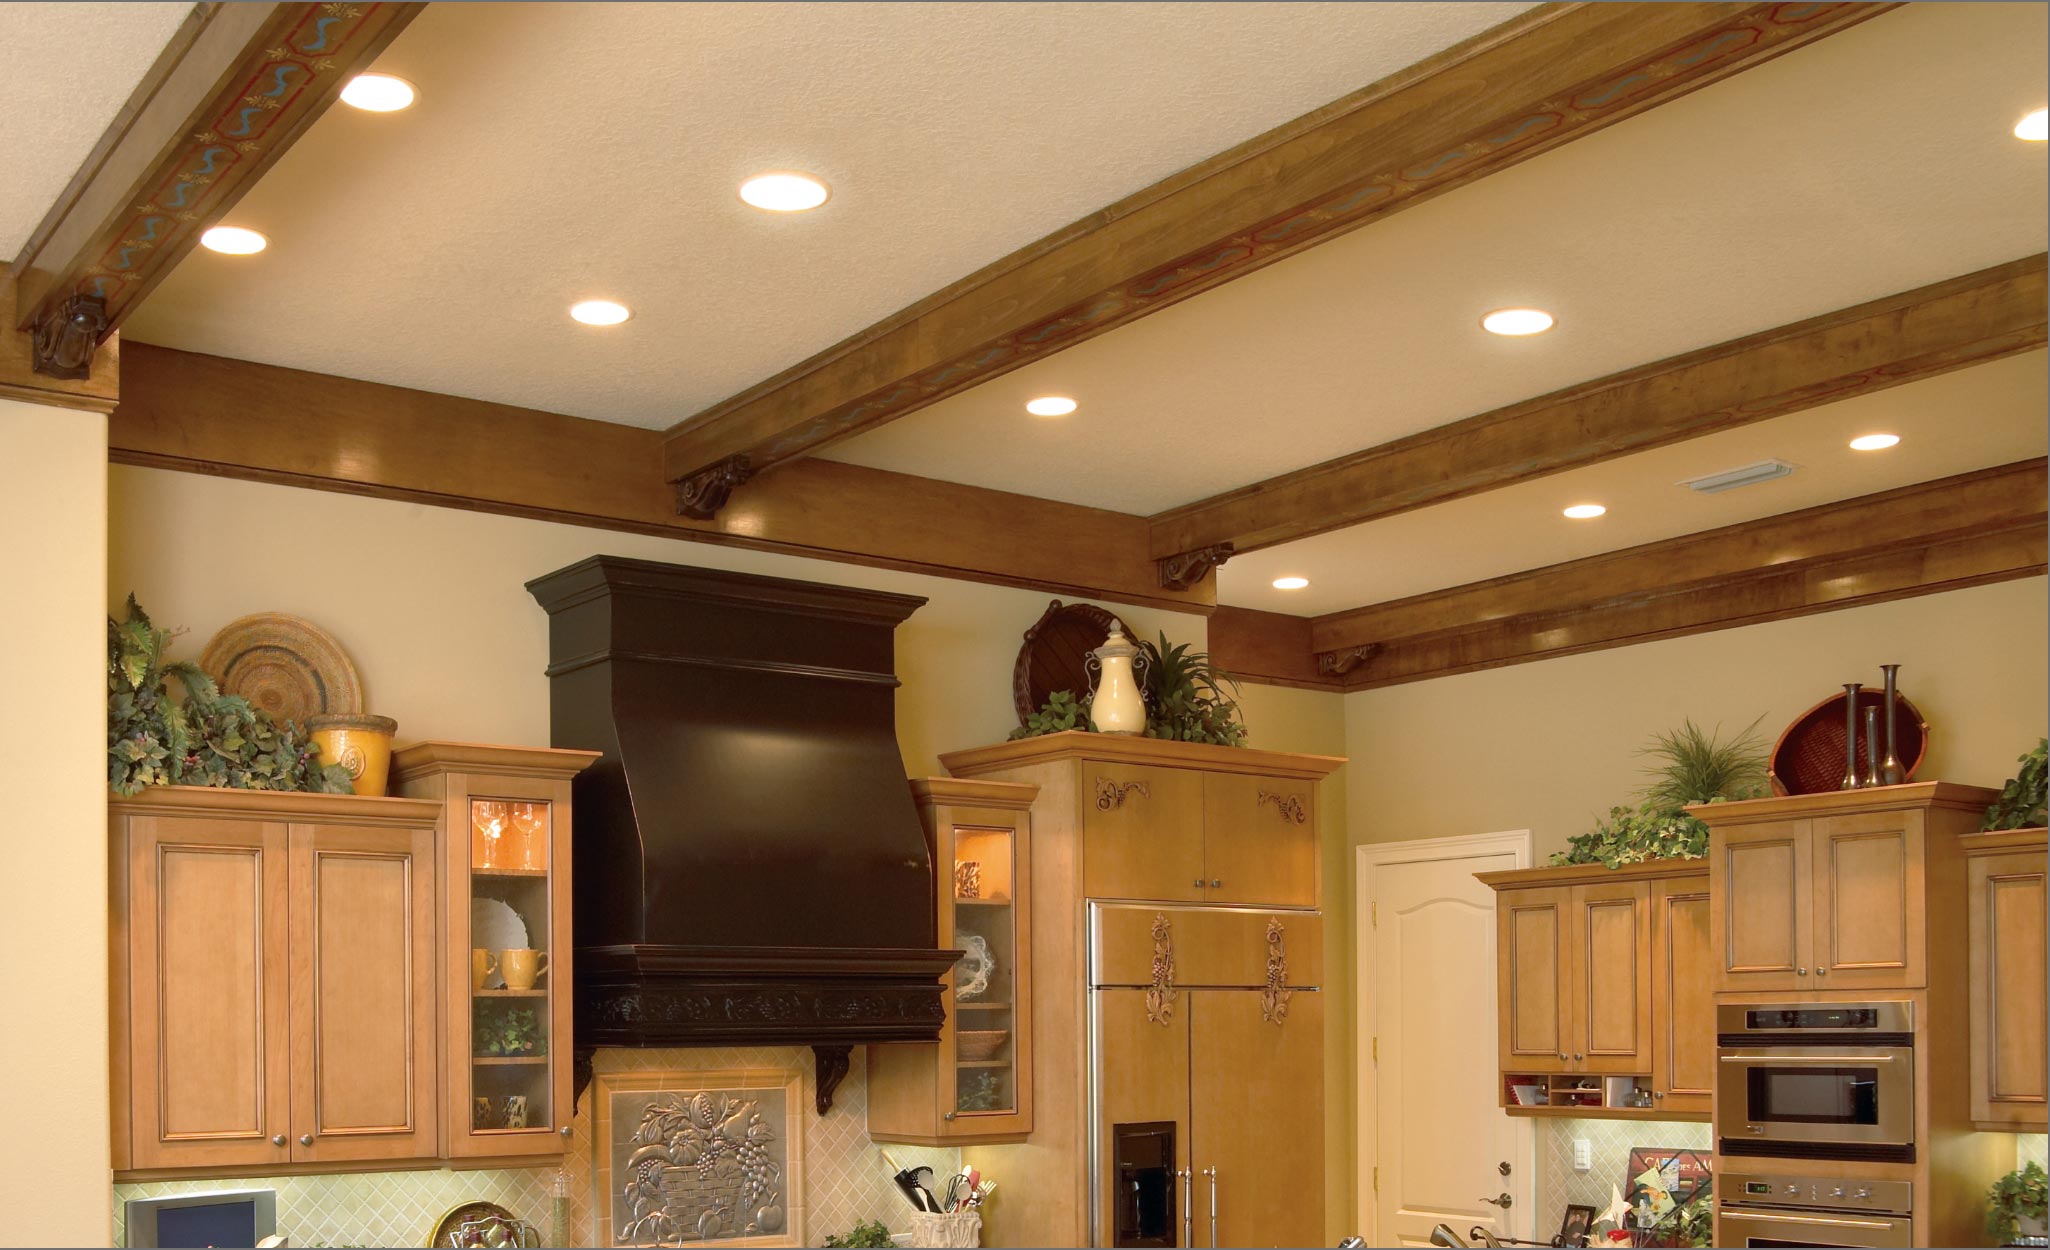 Load-Bearing Support Beam Ideas - The Home Depot